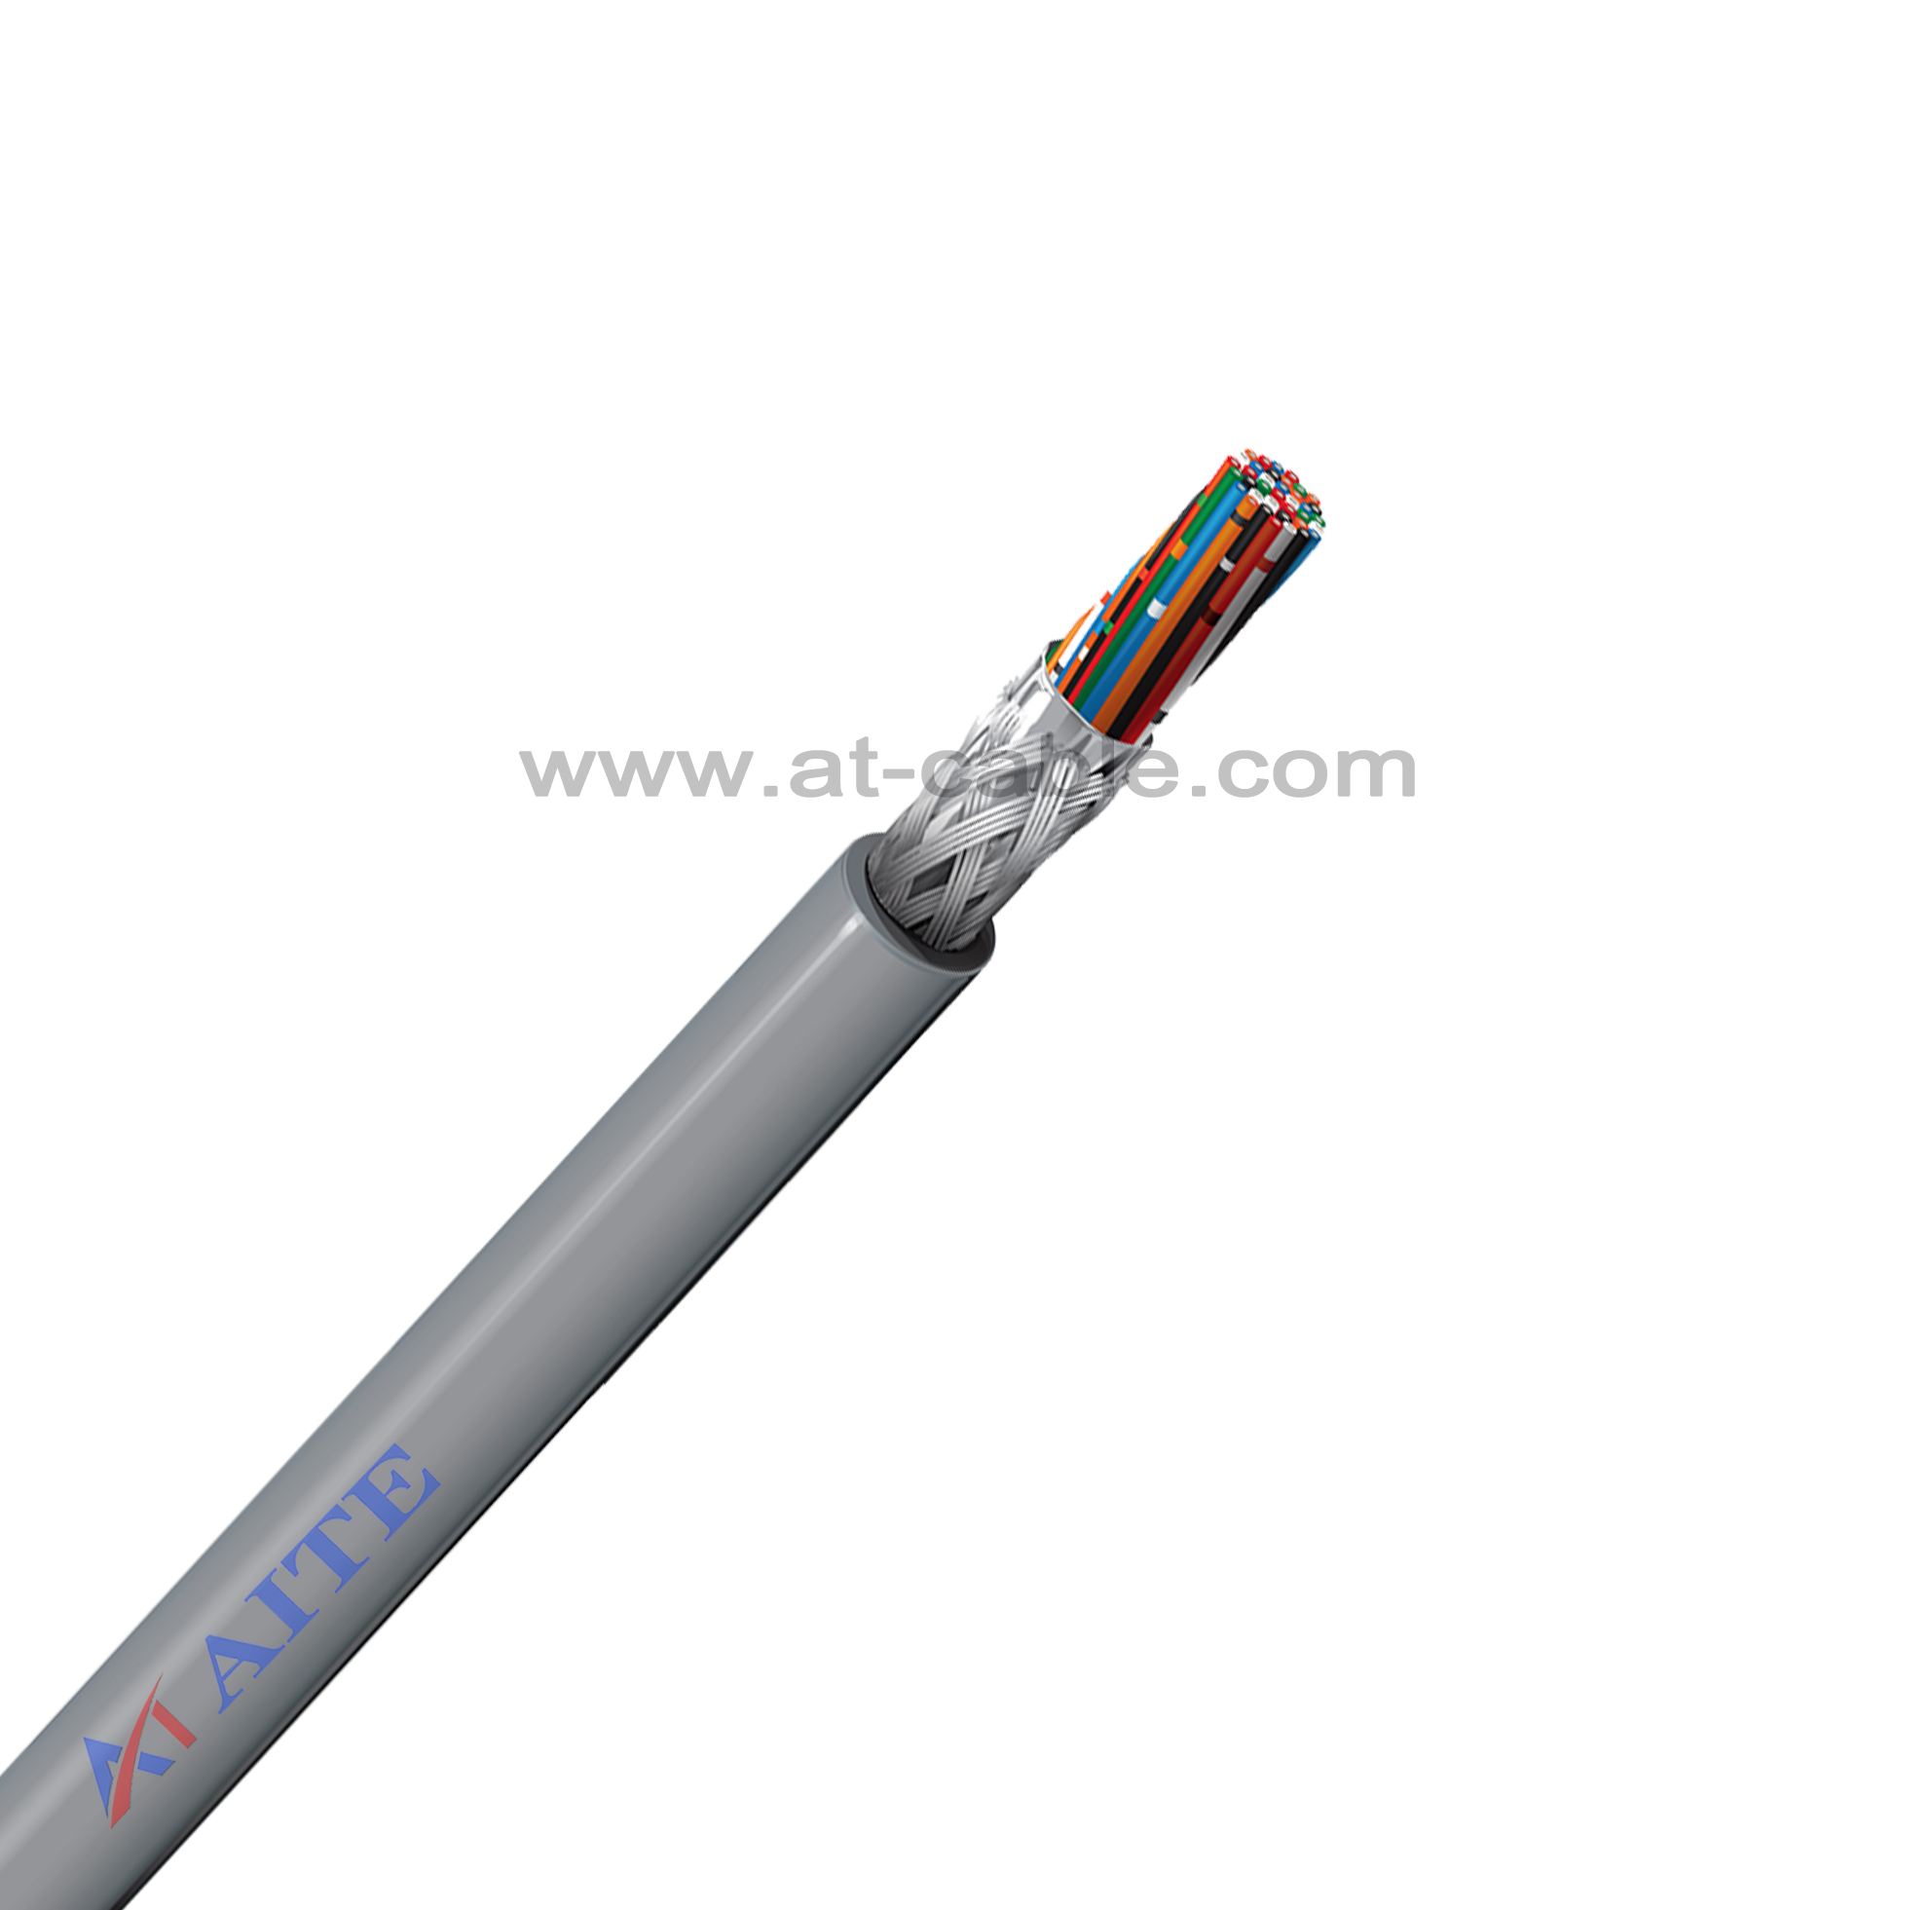 Fieldbus cable- RS 232